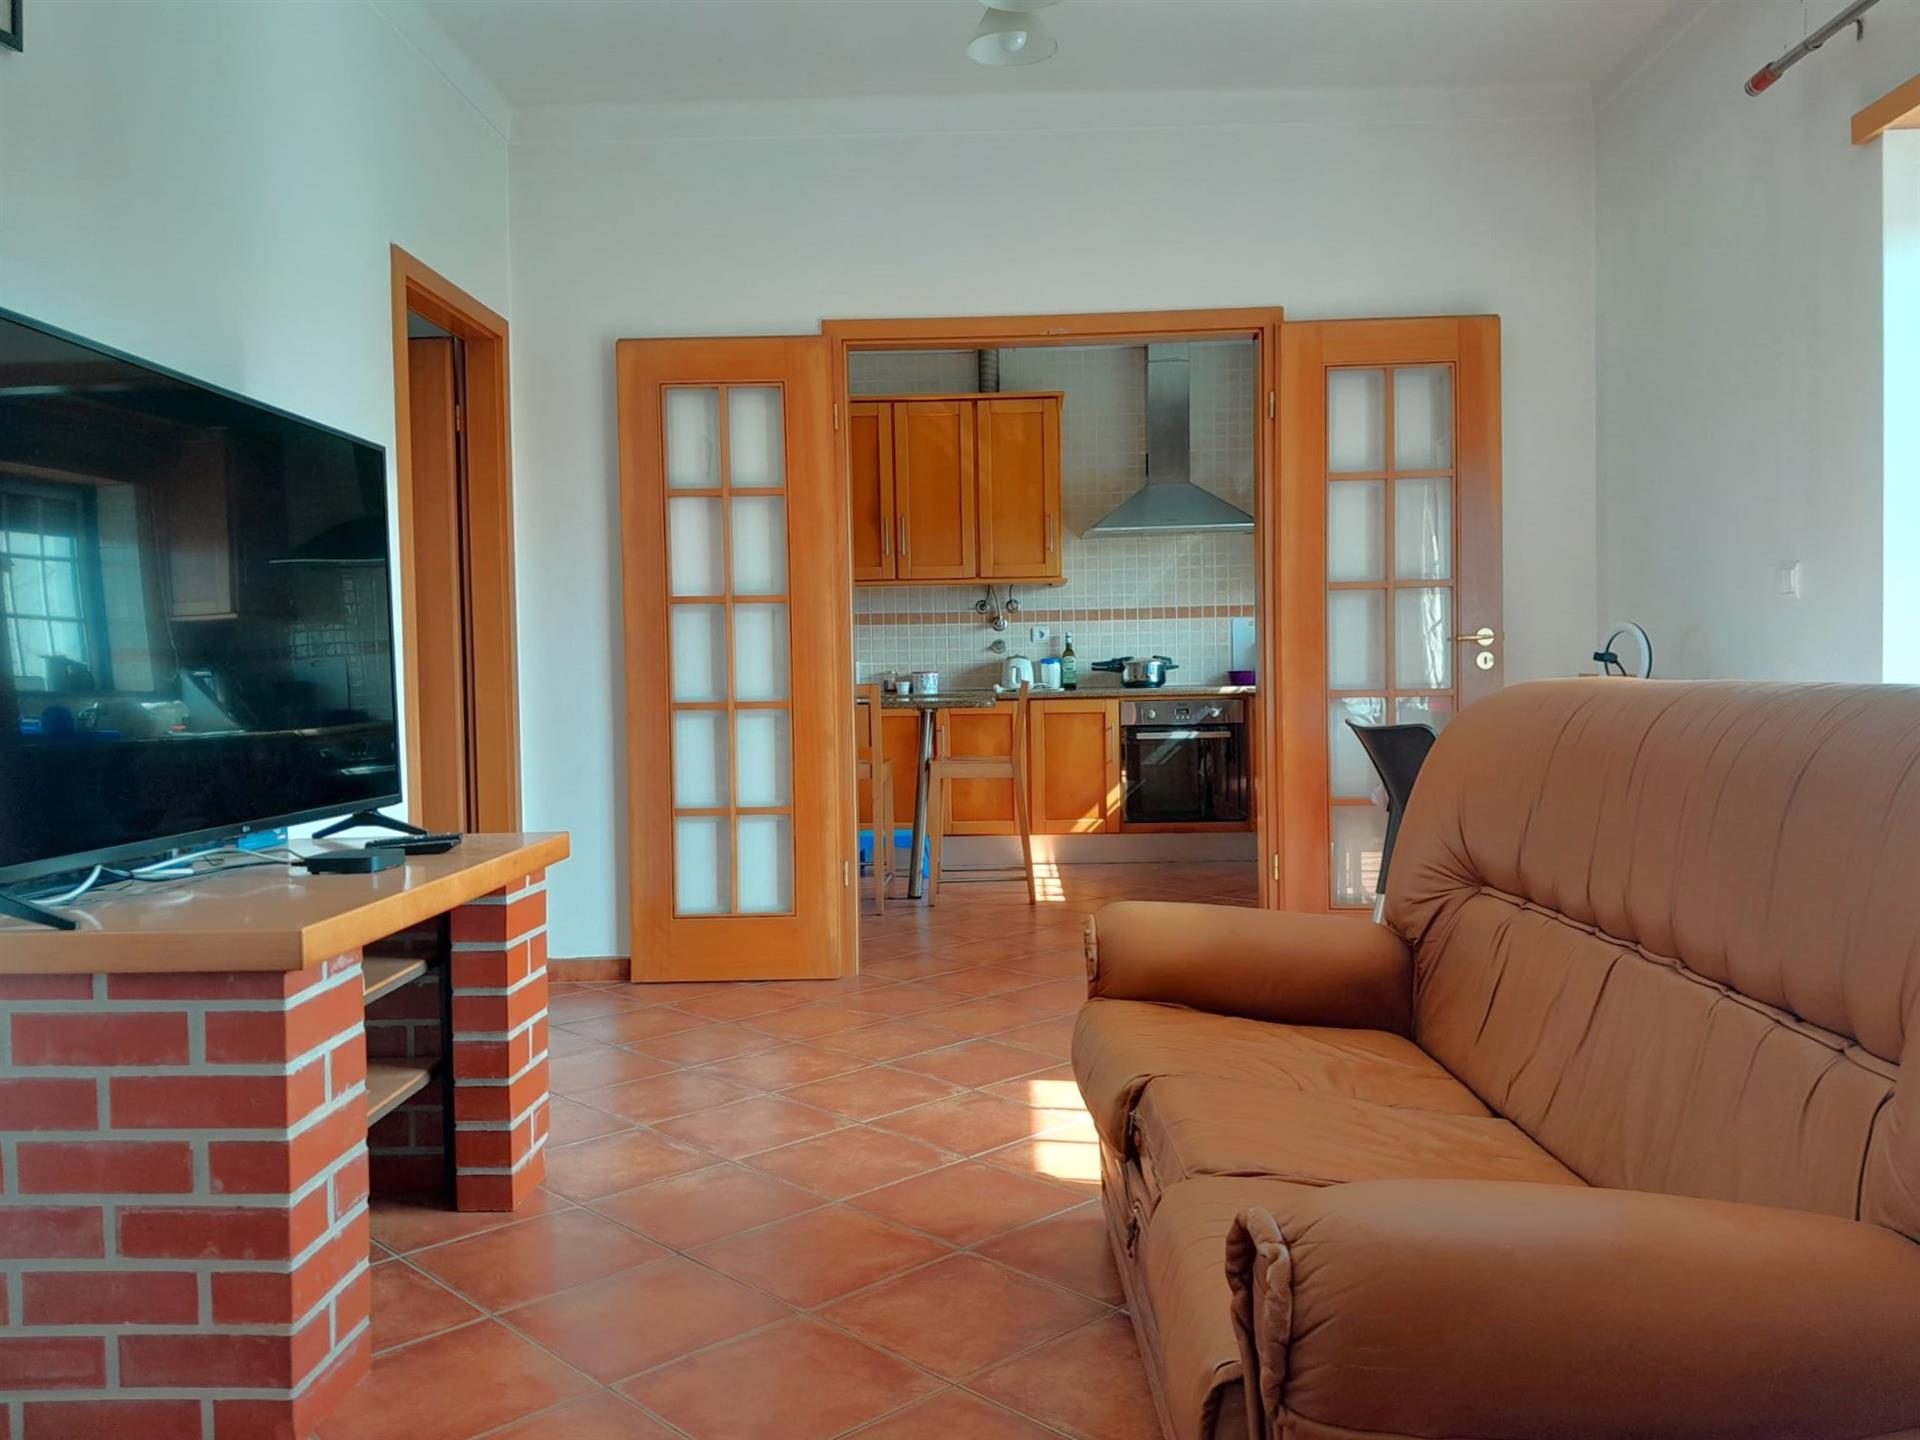 Large 3+2 bedroom villa with high shed, in Pataias